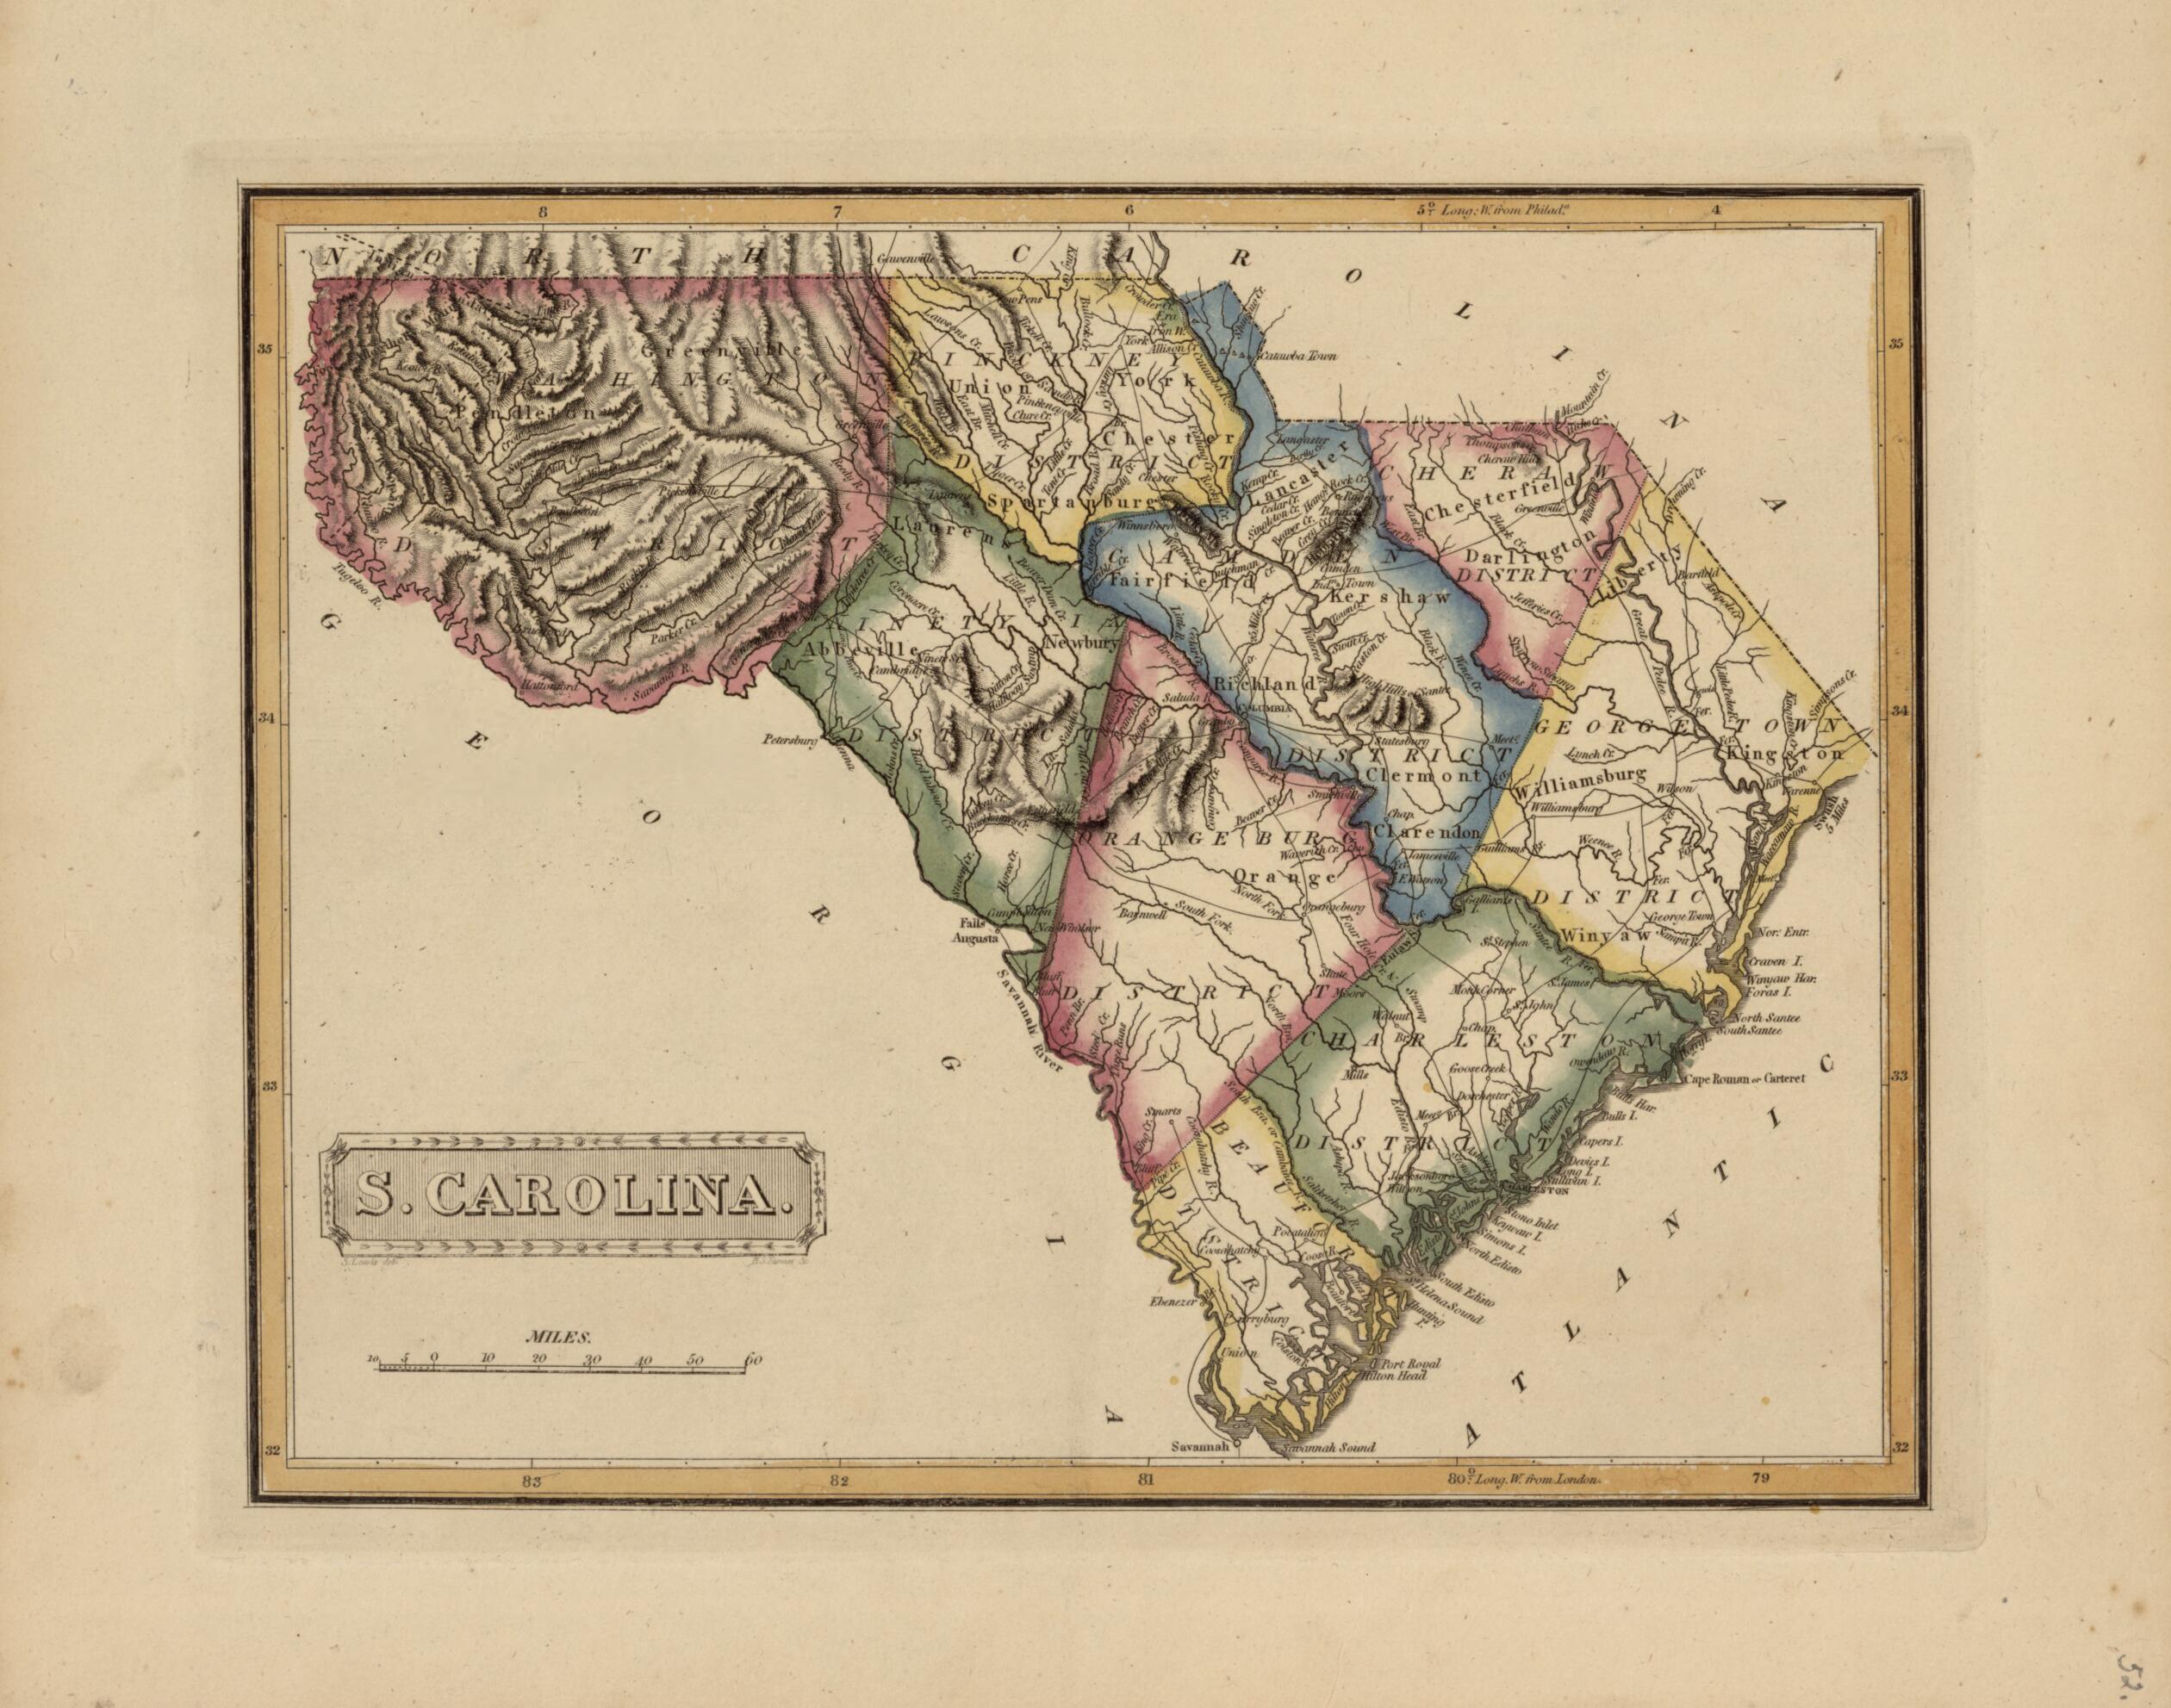 This old map of South Carolina from a New and Elegant General Atlas, Containing Maps of Each of the United States. from 1817 was created by Henry Schenck Tanner in 1817